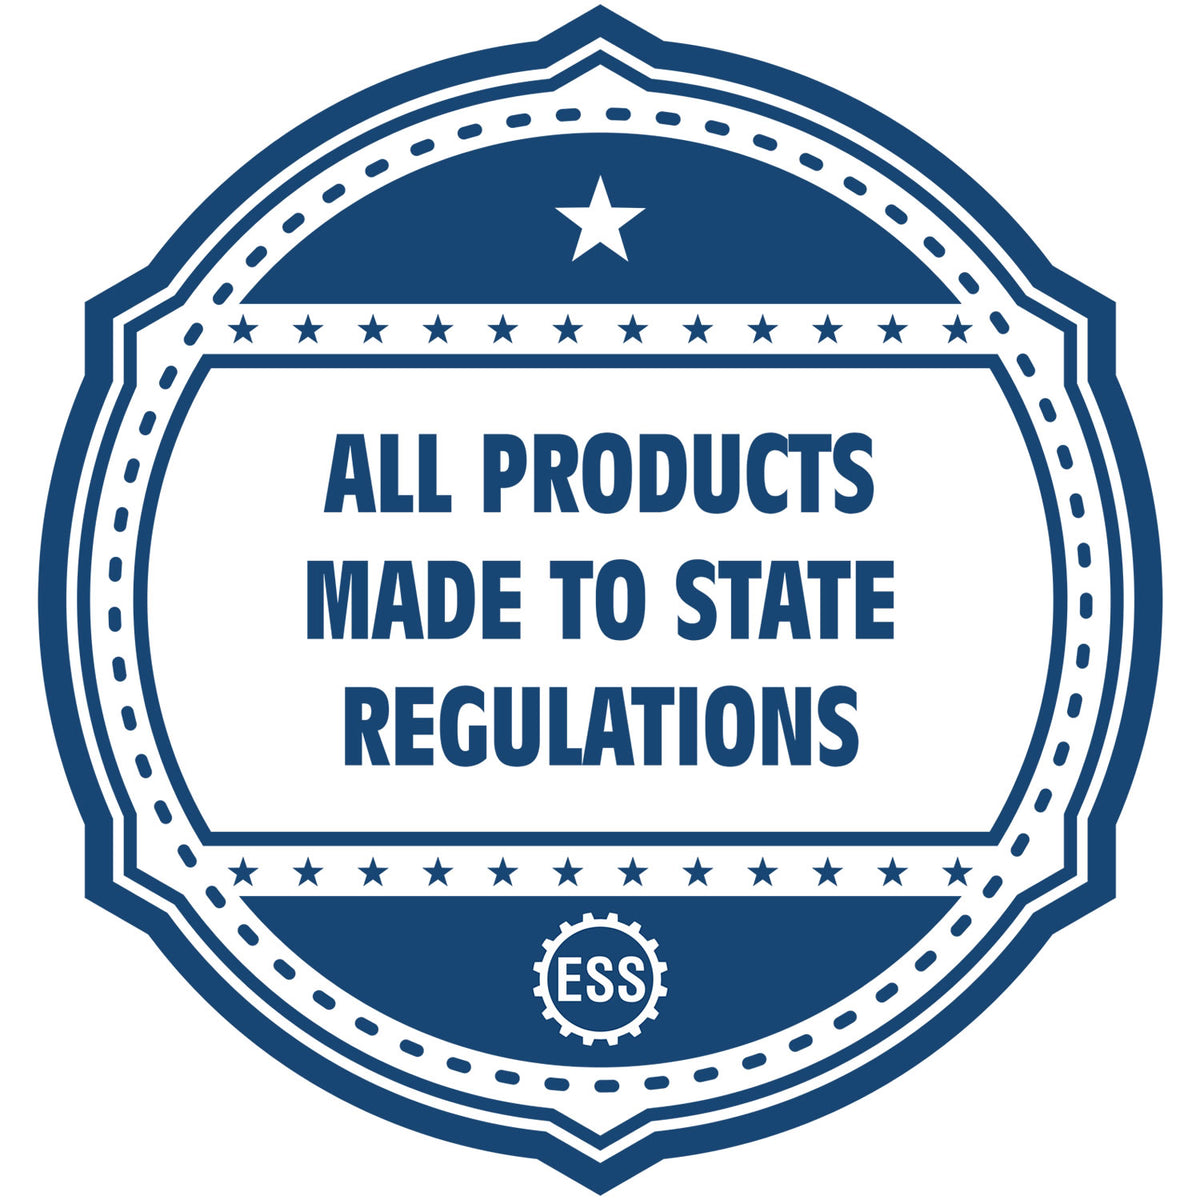 An icon or badge element for the Premium MaxLight Pre-Inked Minnesota Engineering Stamp showing that this product is made in compliance with state regulations.